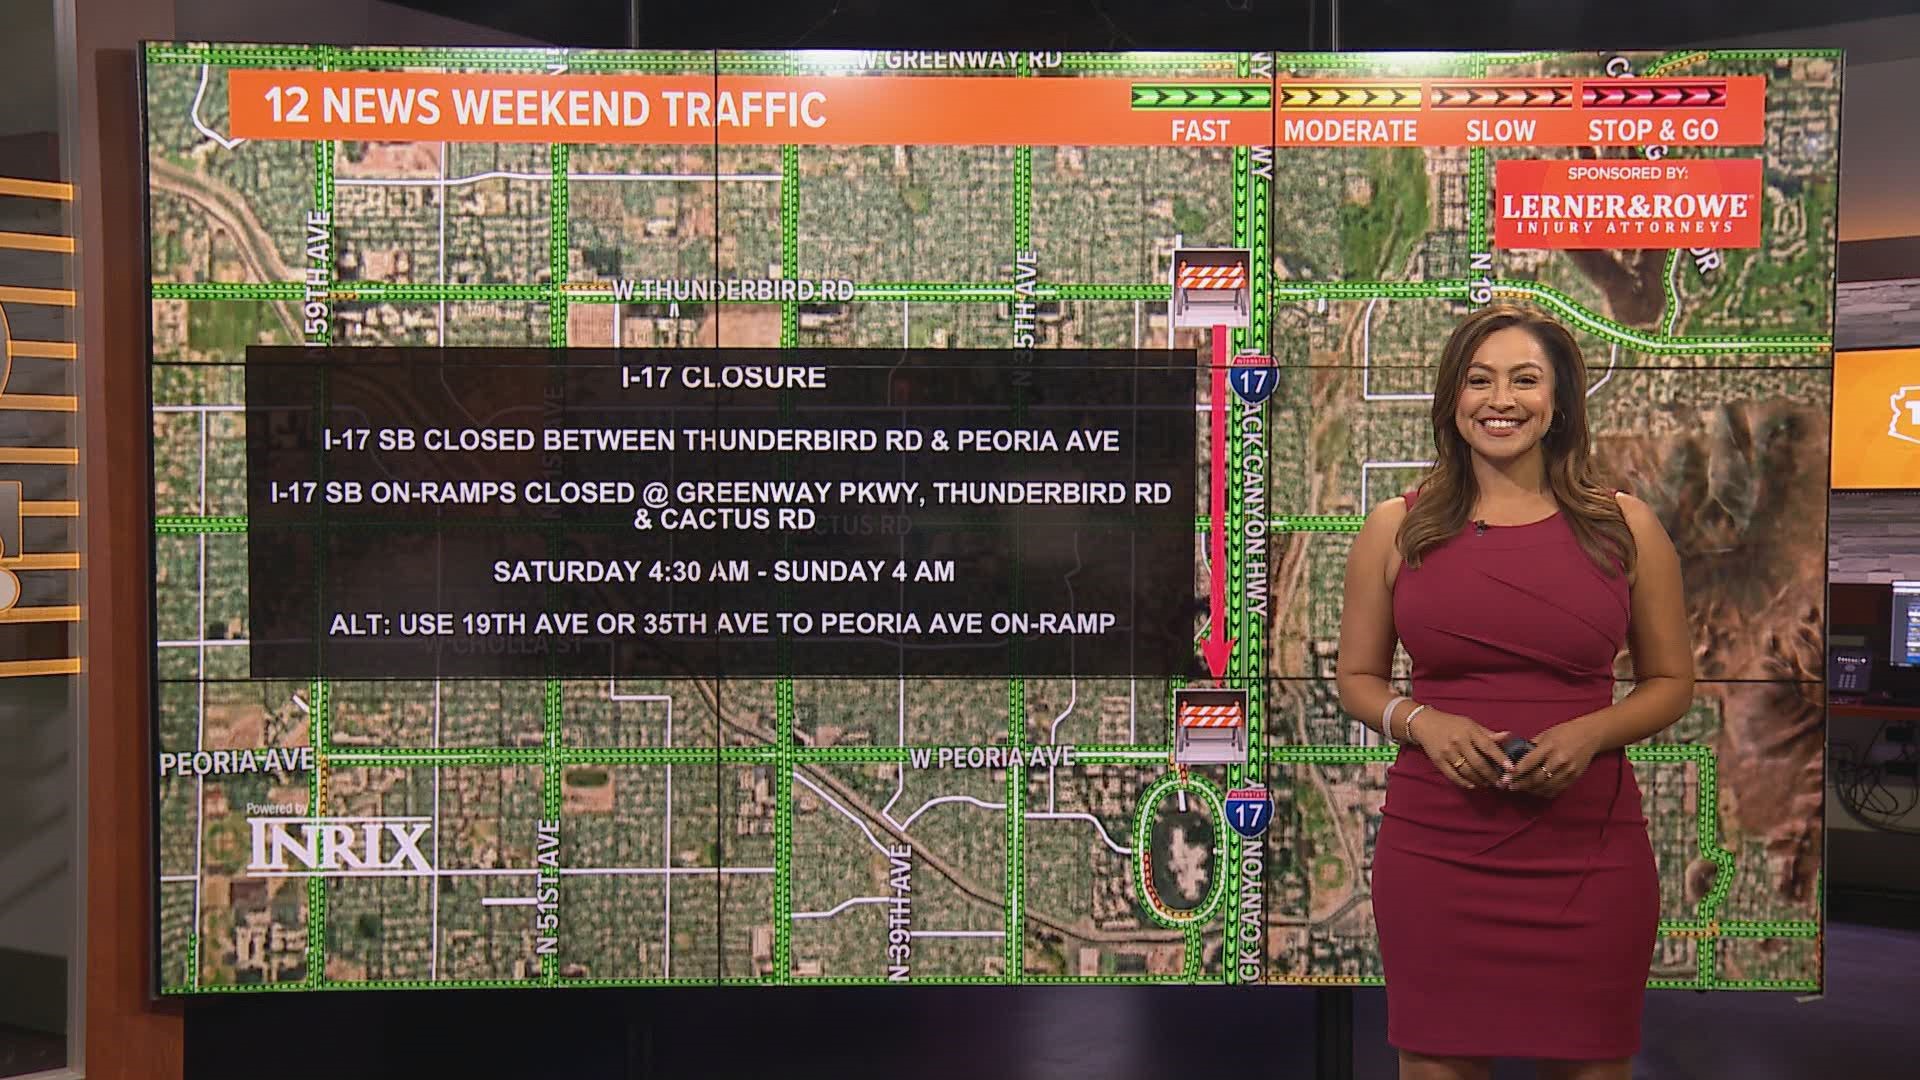 Vanessa Ramirez has a breakdown of the road closures and detours on Valley roads this weekend.